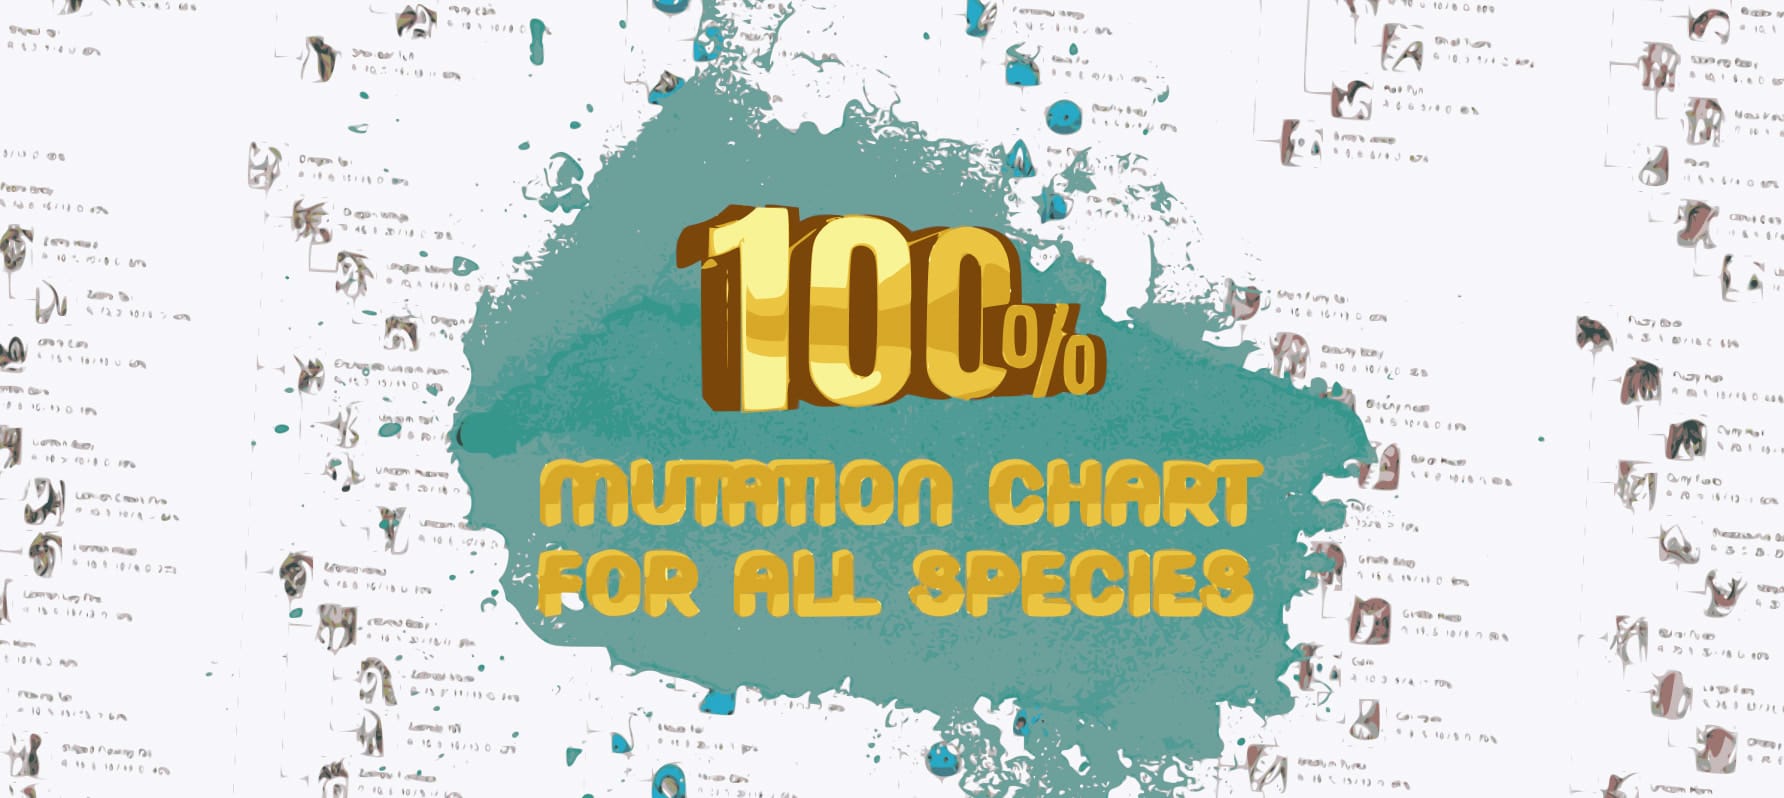 Mutation chart is now 100% for all species image